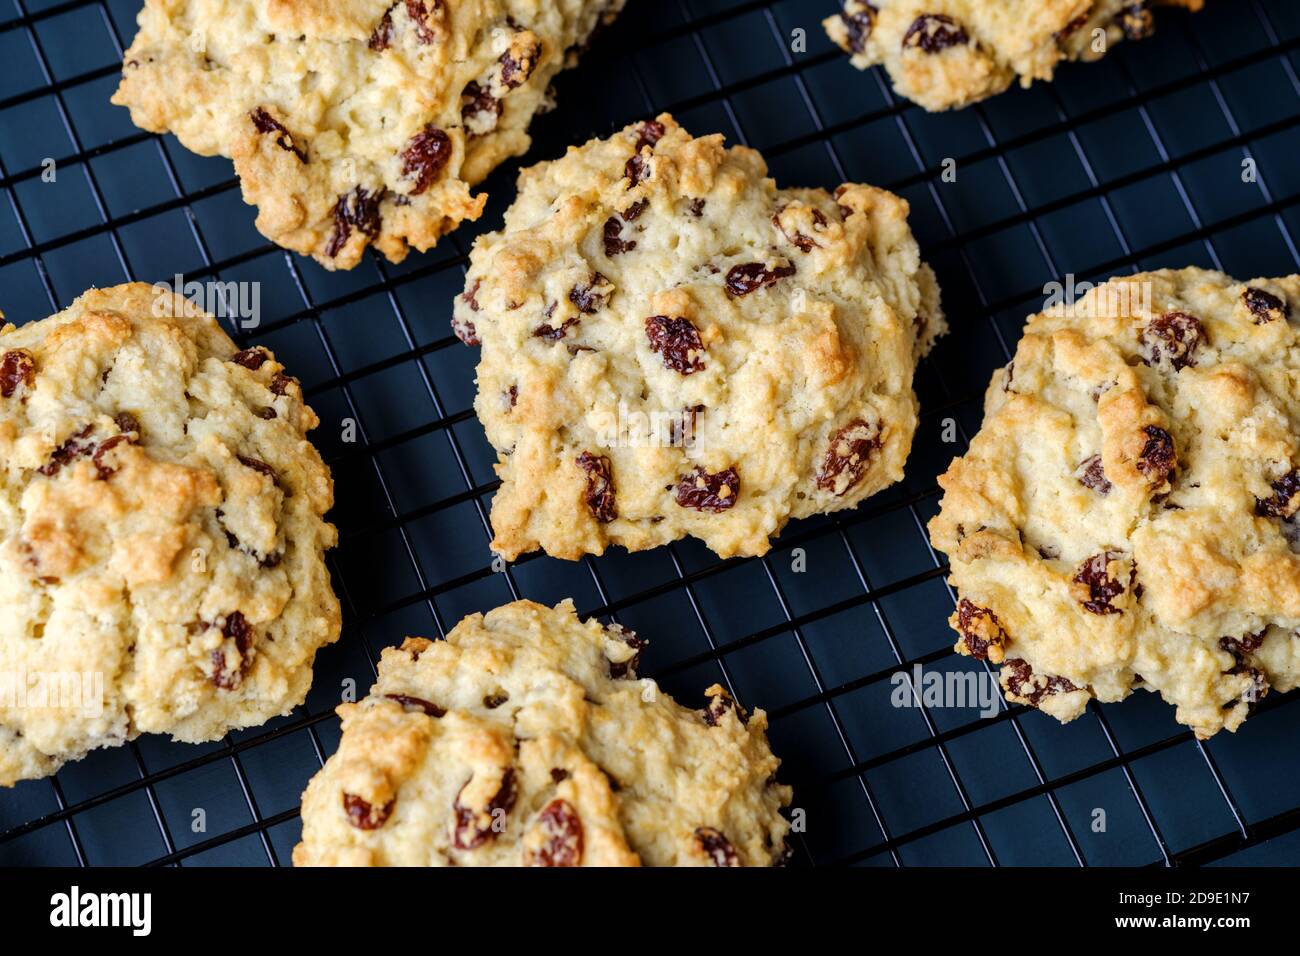 A freshly home baked batch of traditional Rock Cakes, or Rock Buns, on a cooling rack. The tasty looking cakes are filled with Sultanas and Raisins Stock Photo